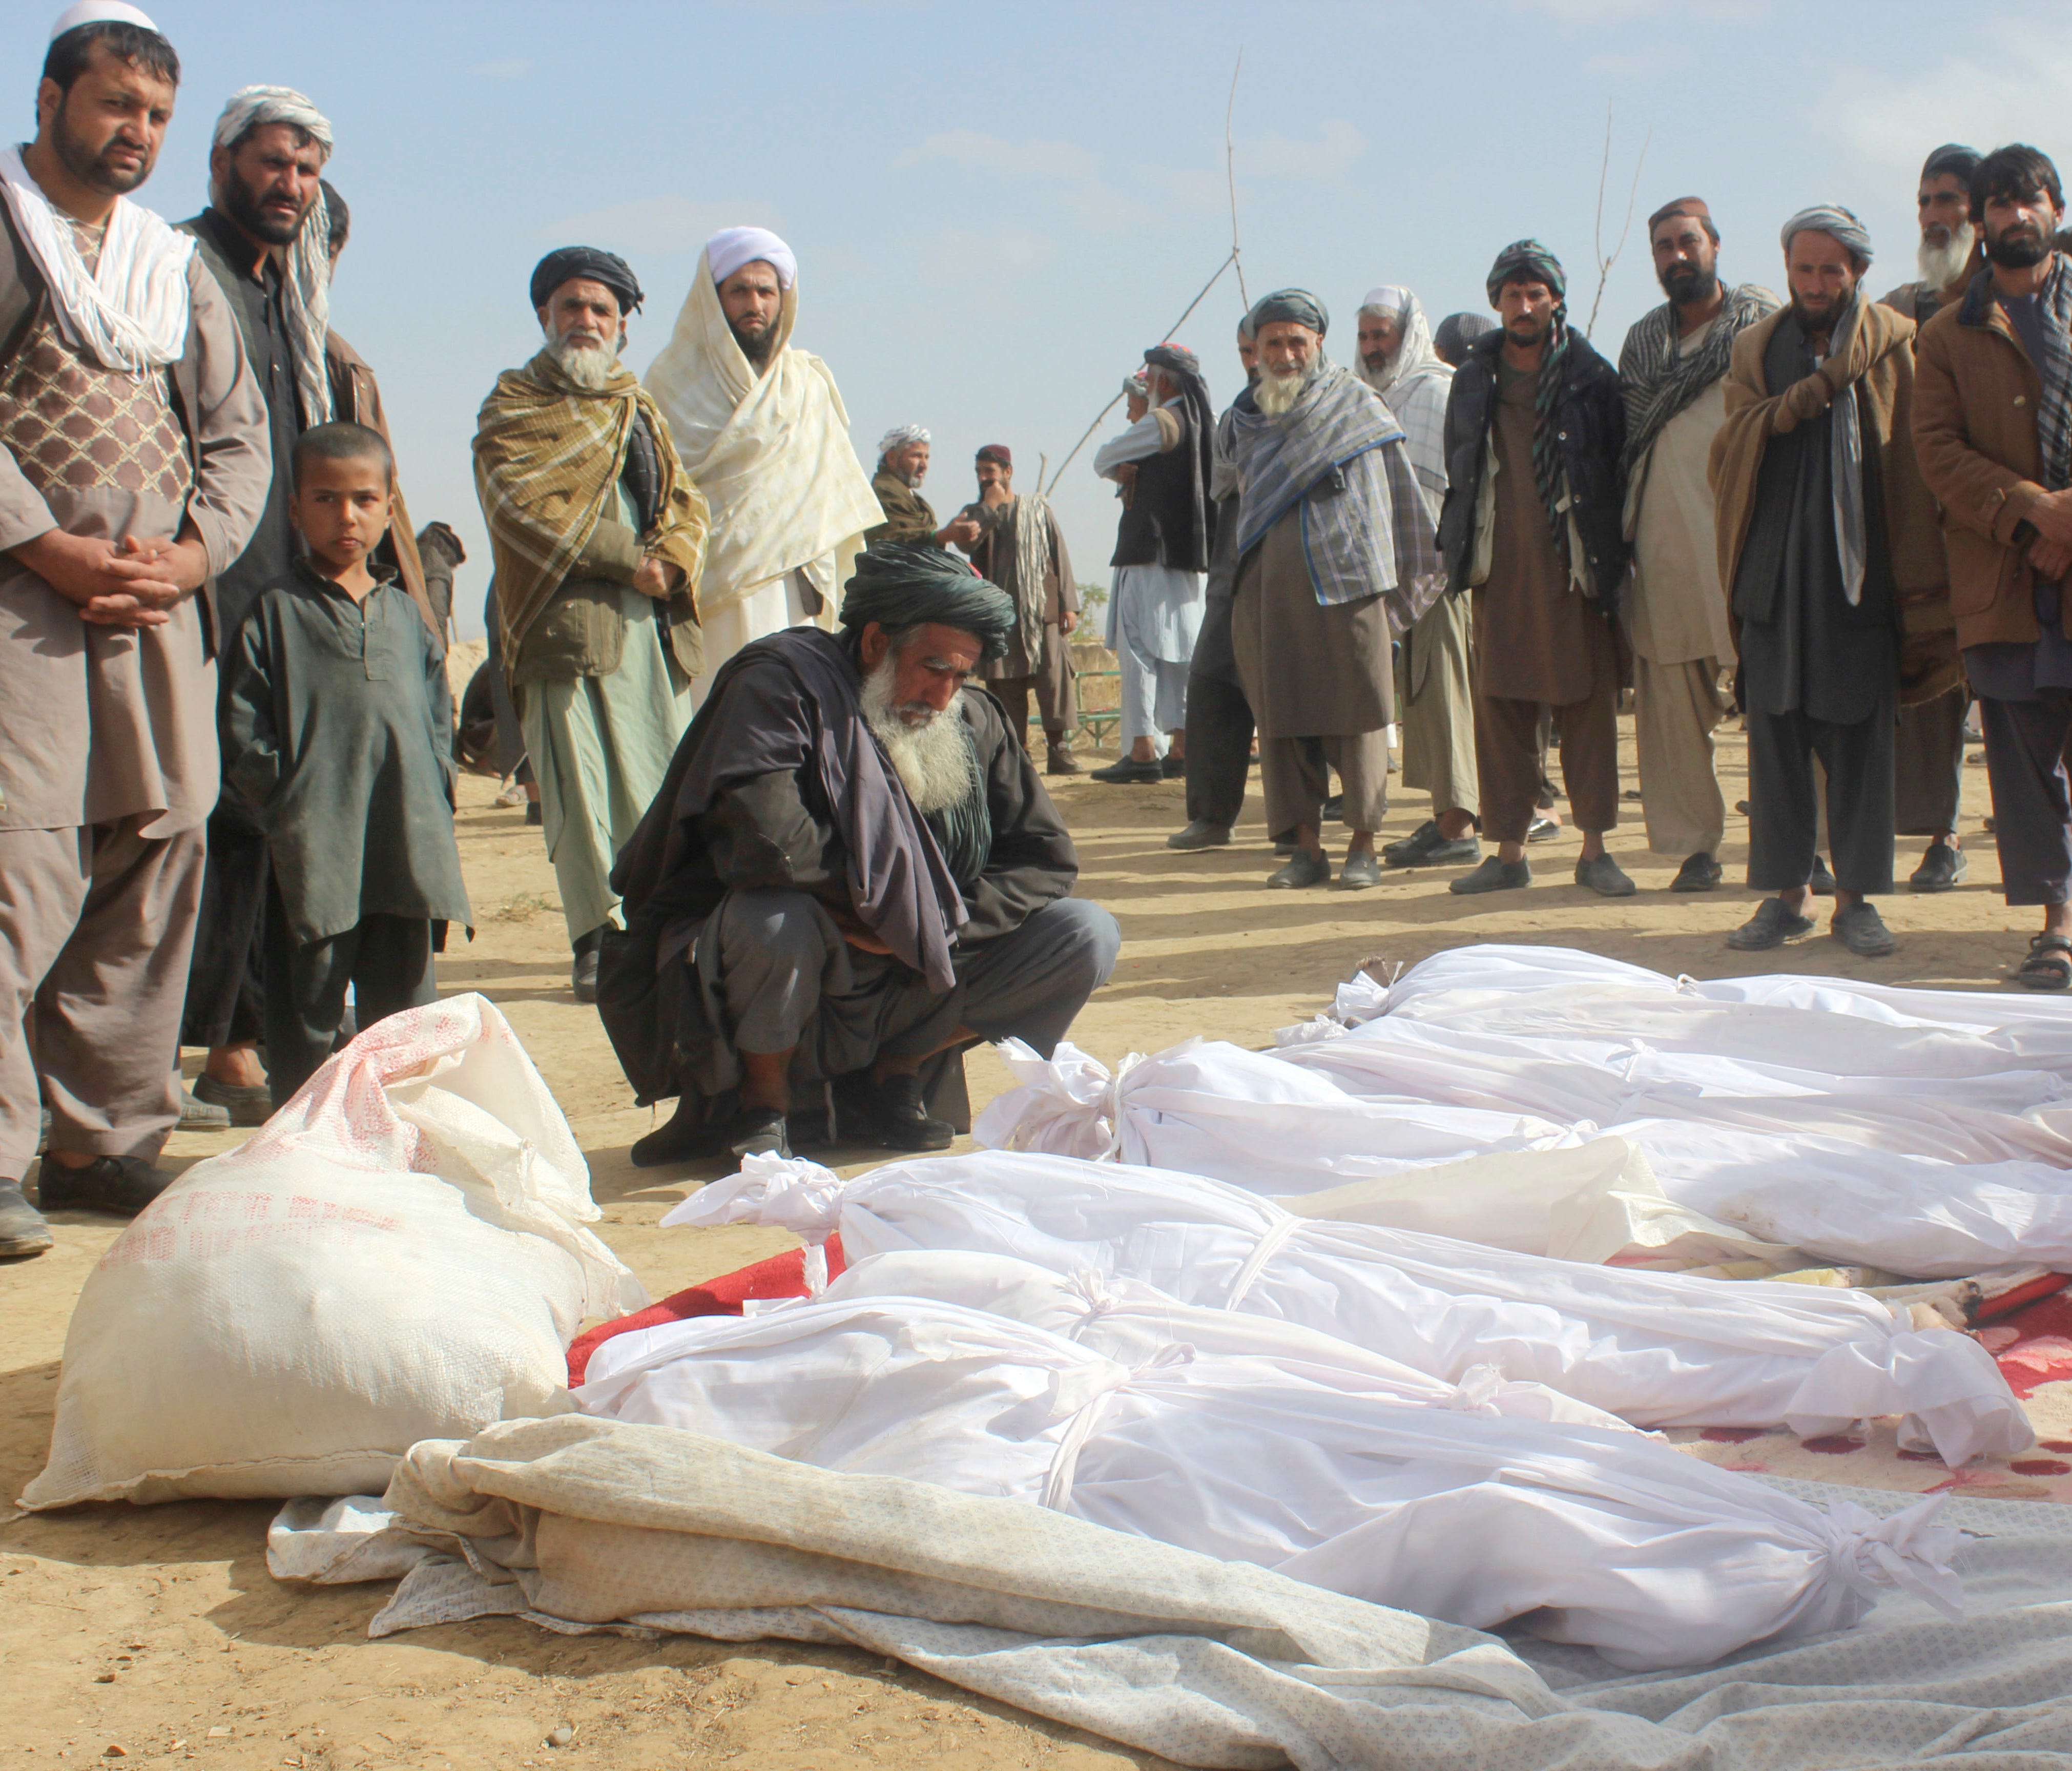 In this Nov. 4, 2016 file photo, Afghan villagers gather around several victims' bodies who were killed during clashes between Taliban and Afghan security forces in the Taliban-controlled, Buz-e Kandahari village in Kunduz province, Afghanistan.